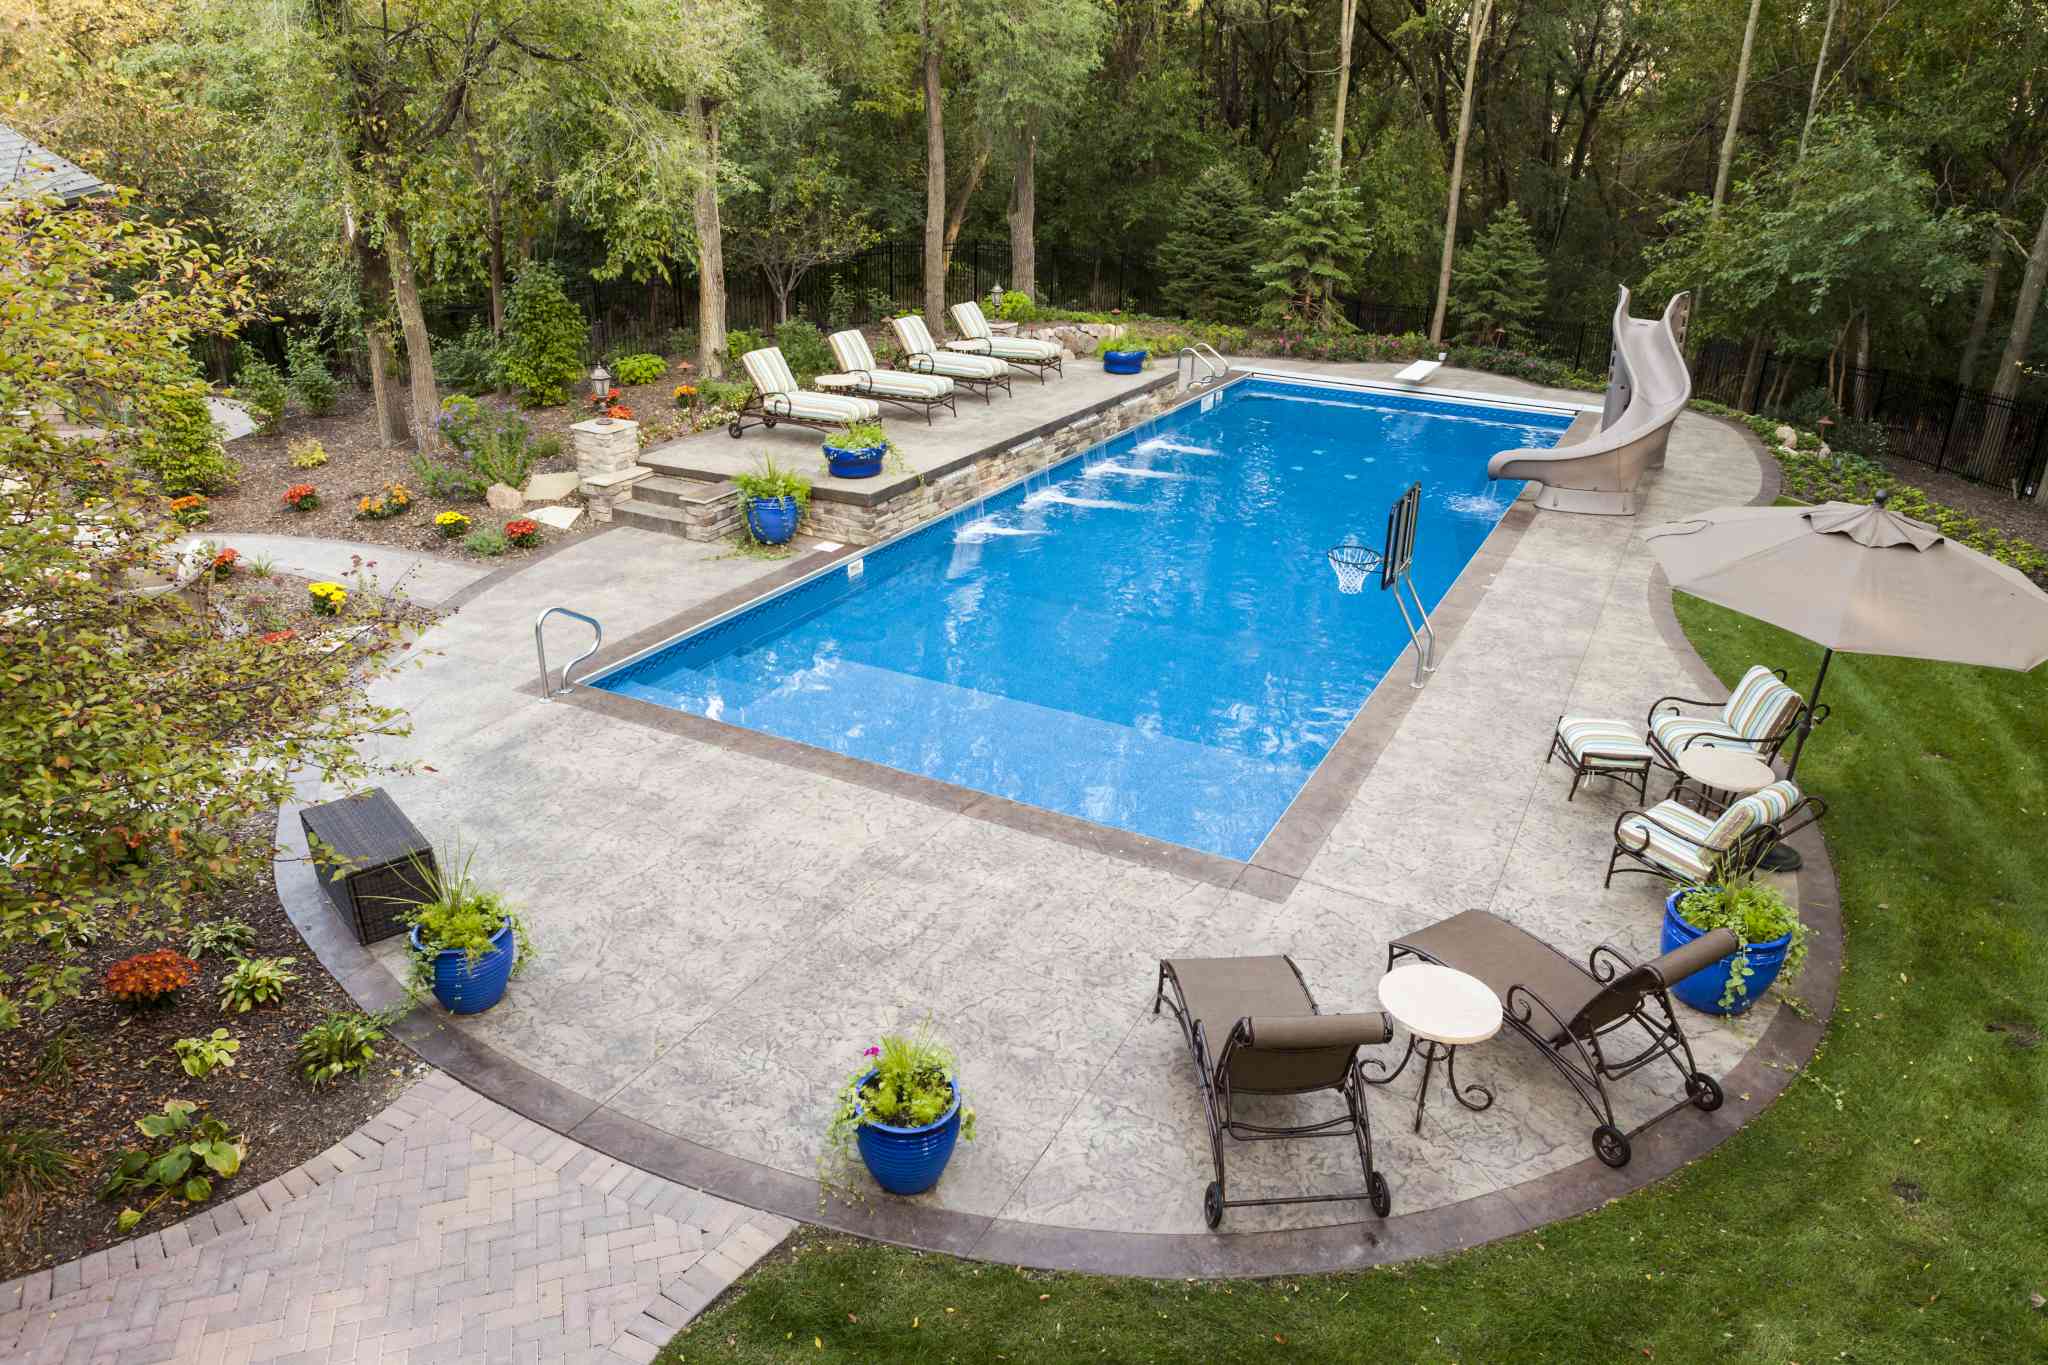 What to Consider When Building an Inground Pool